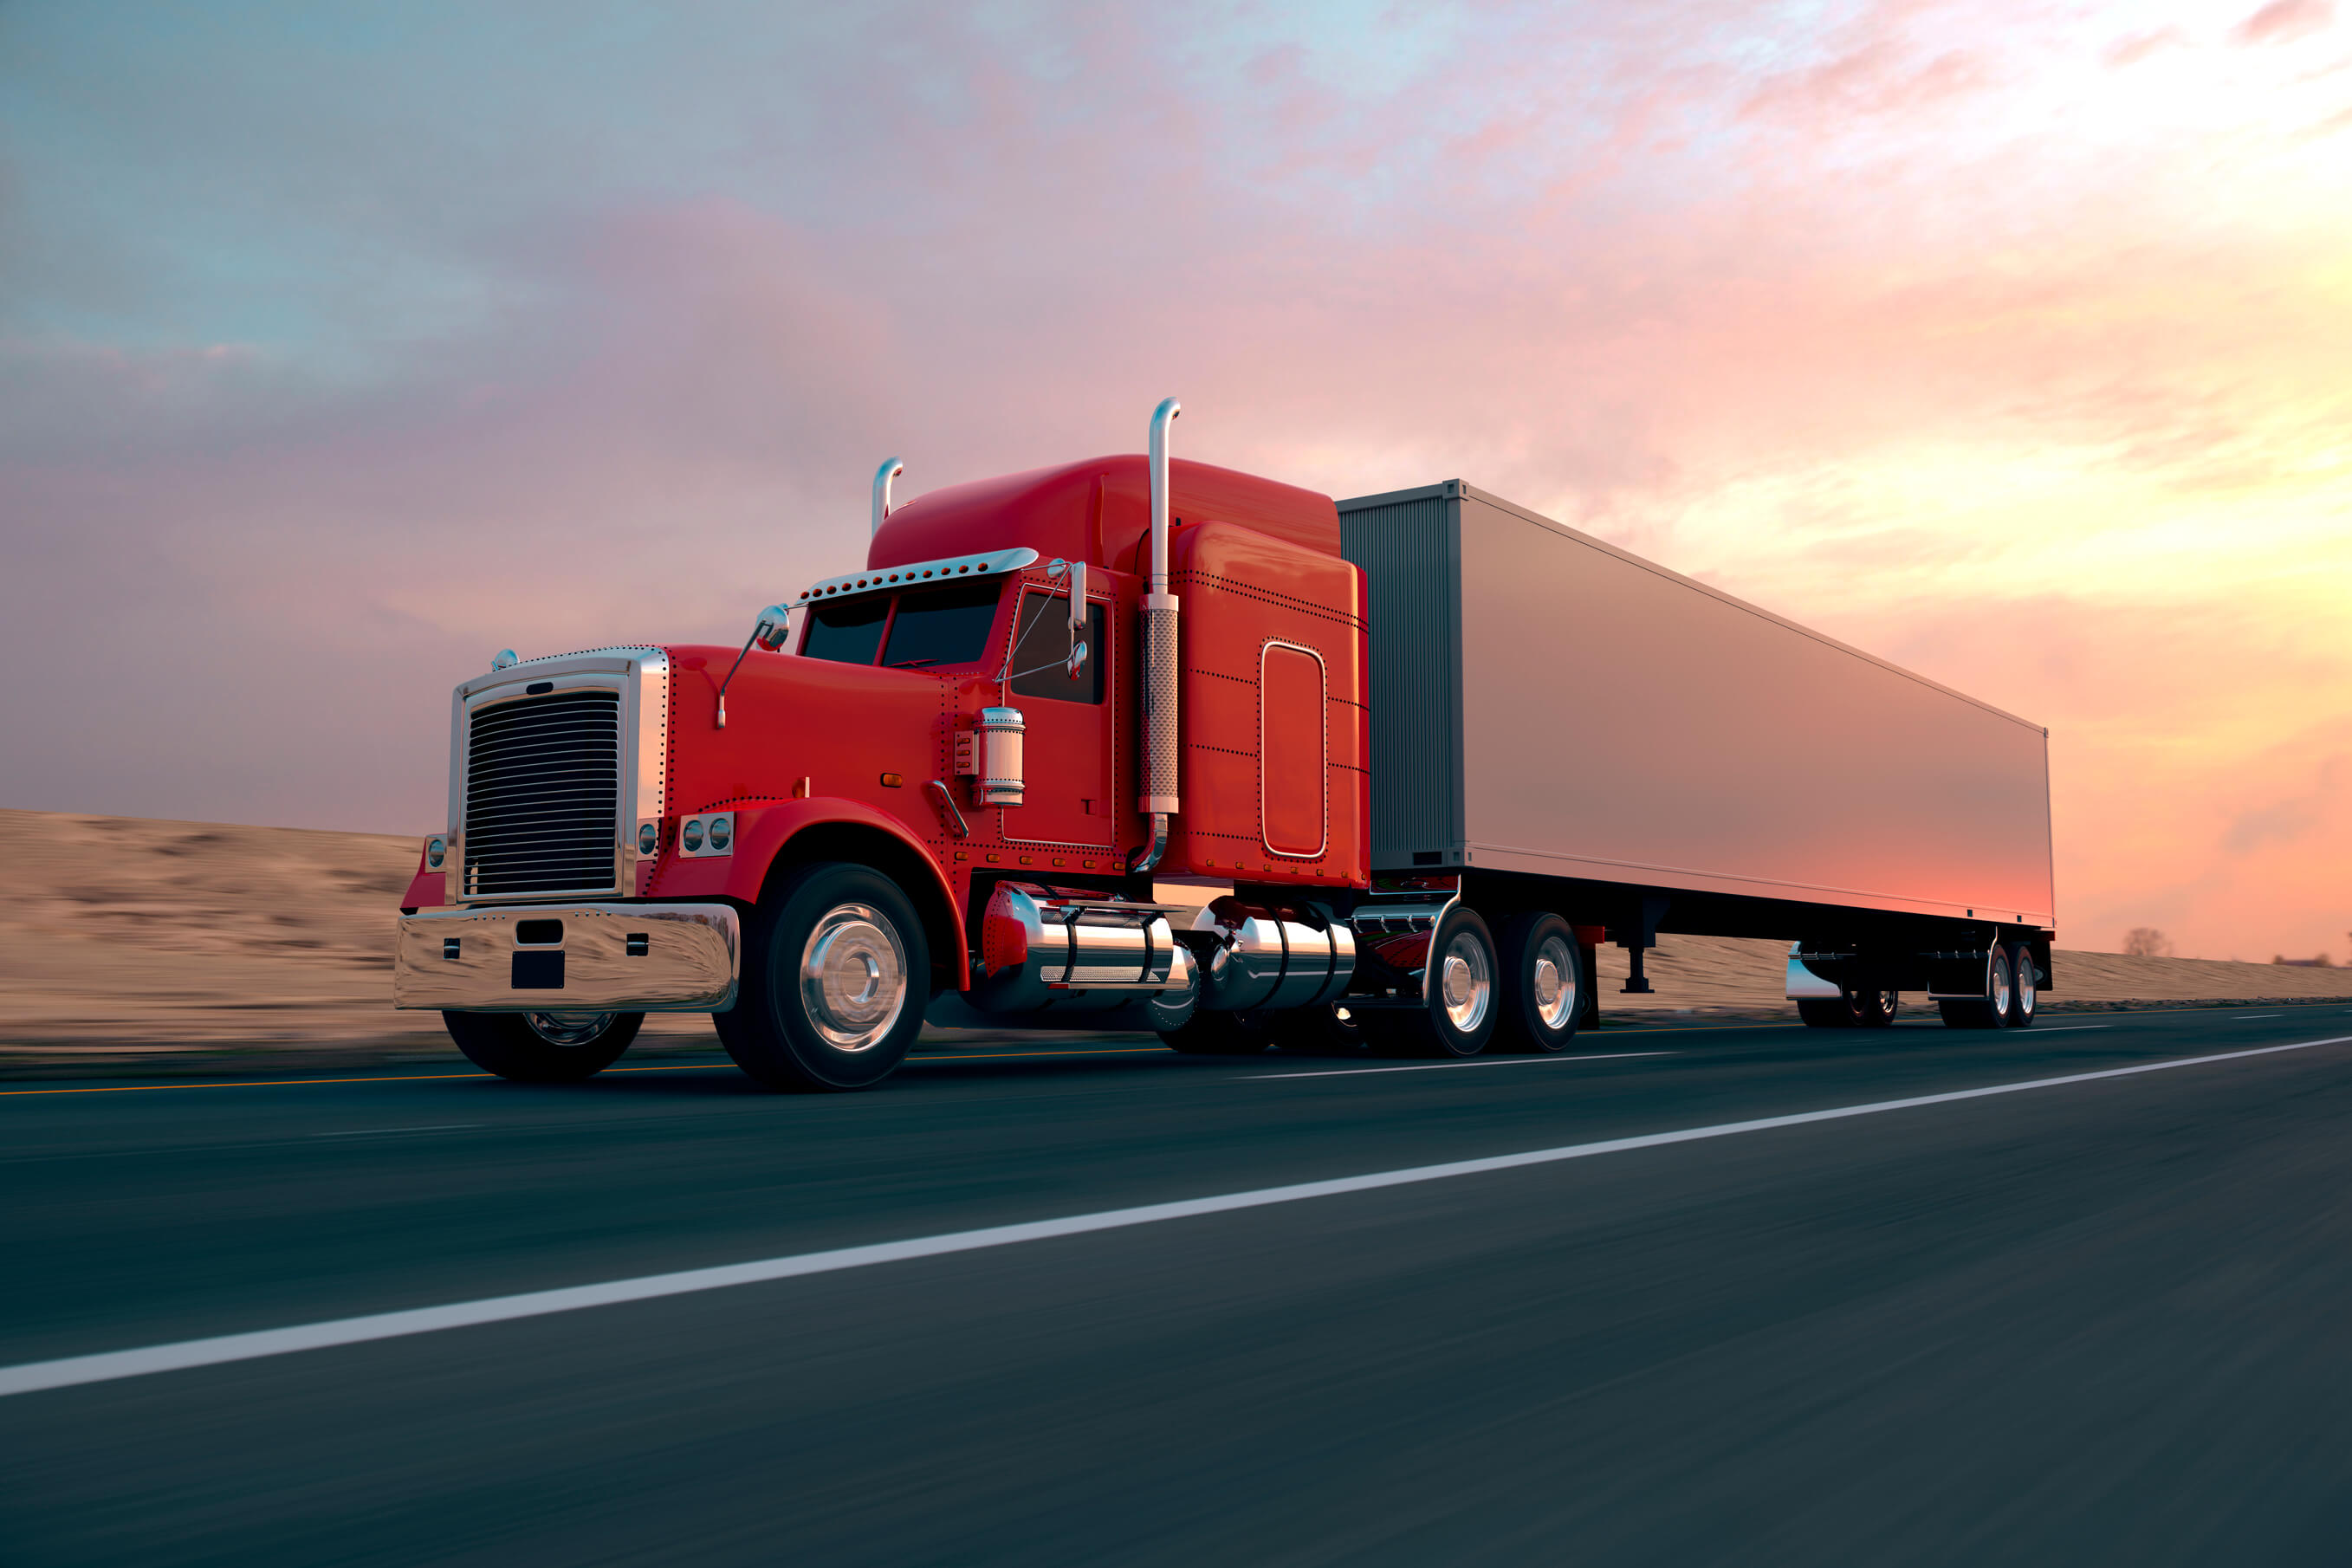 A freight truck driving on an empty highway at dusk